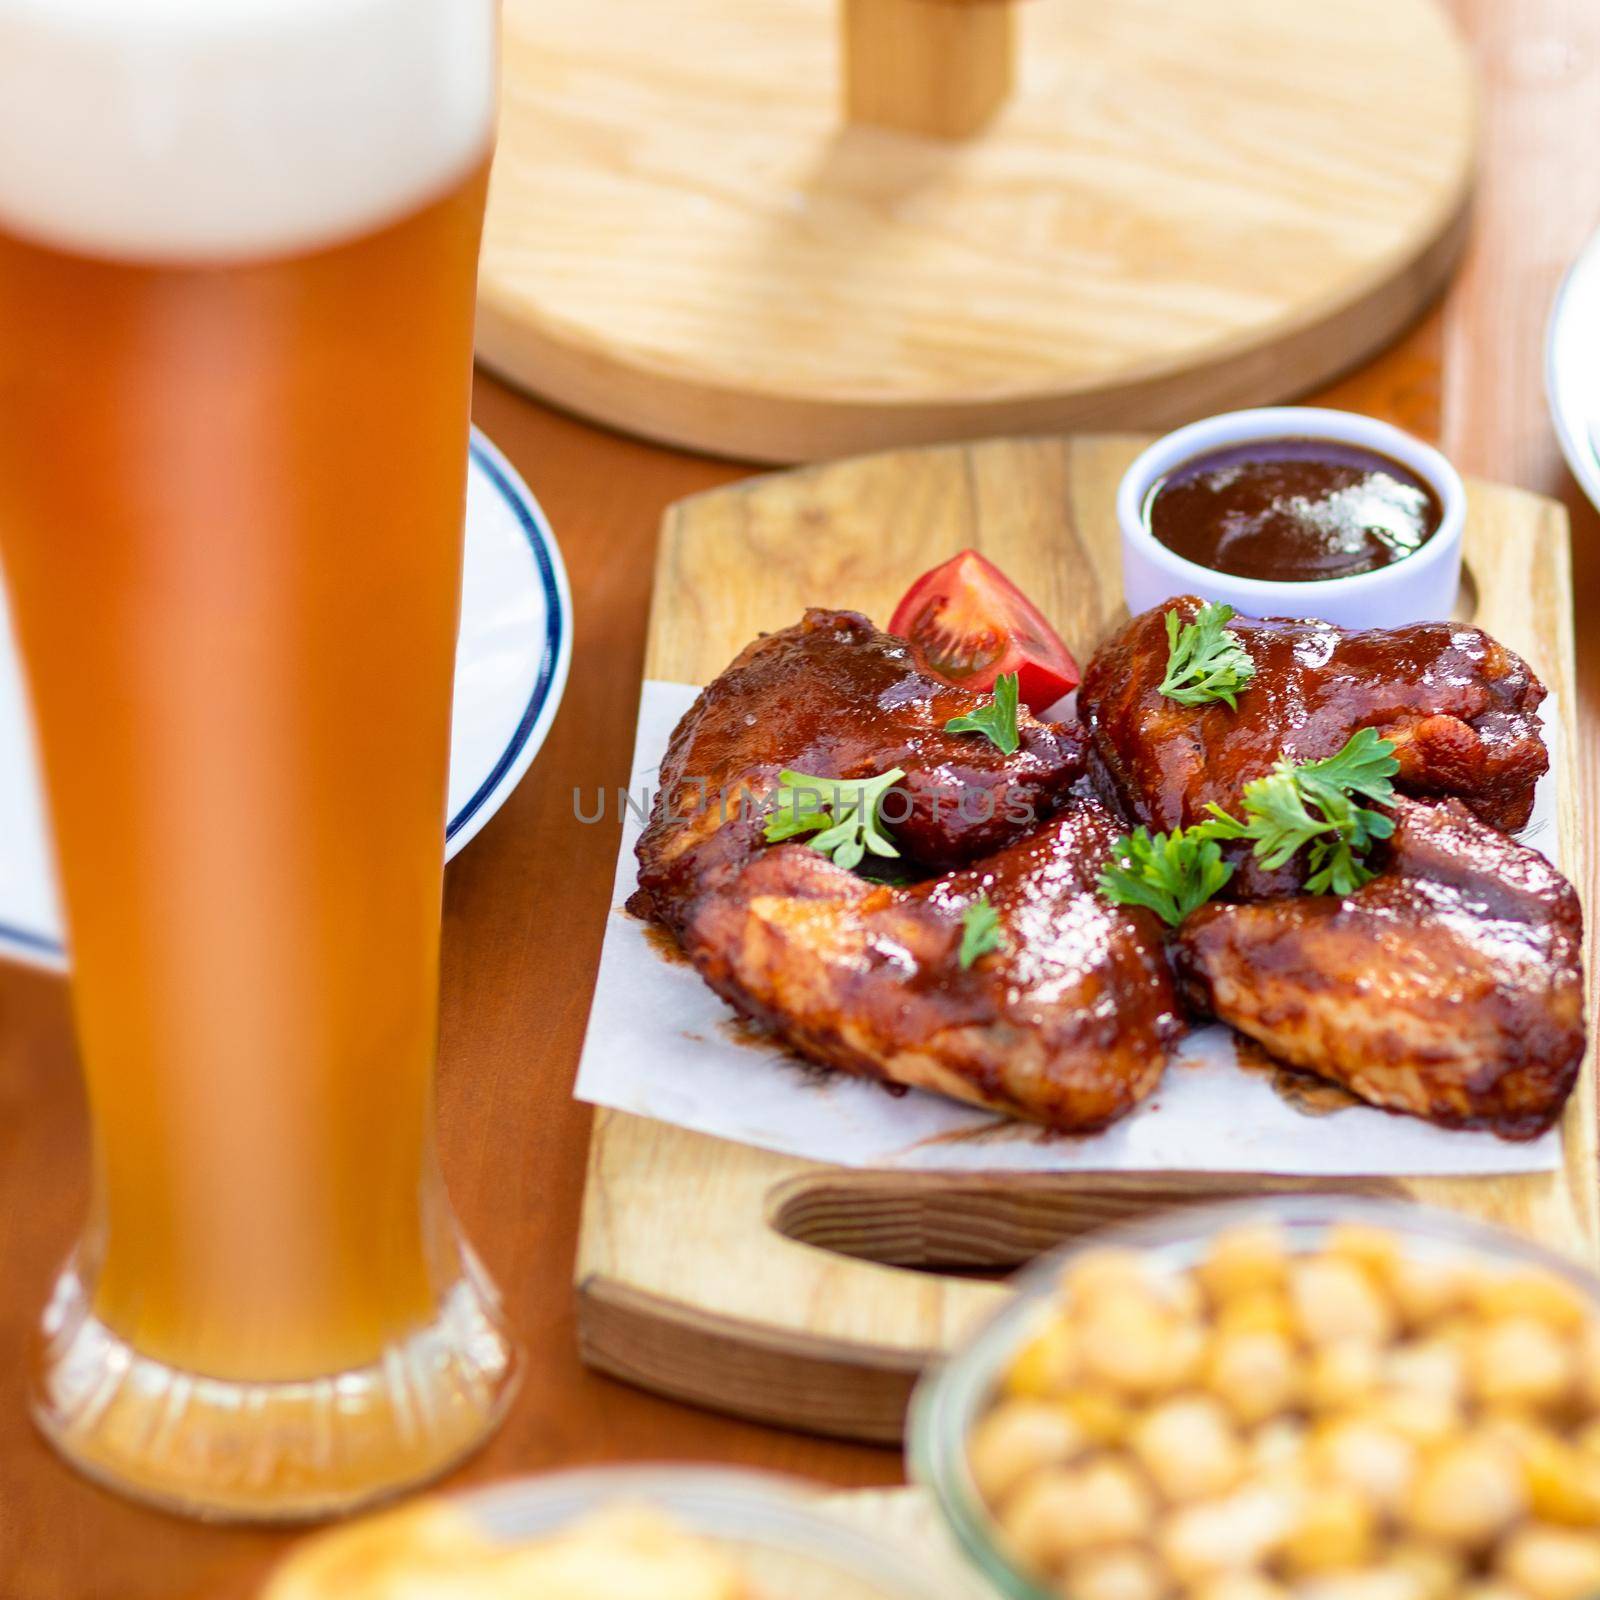 Barbecue chicken meal with beer and sauce